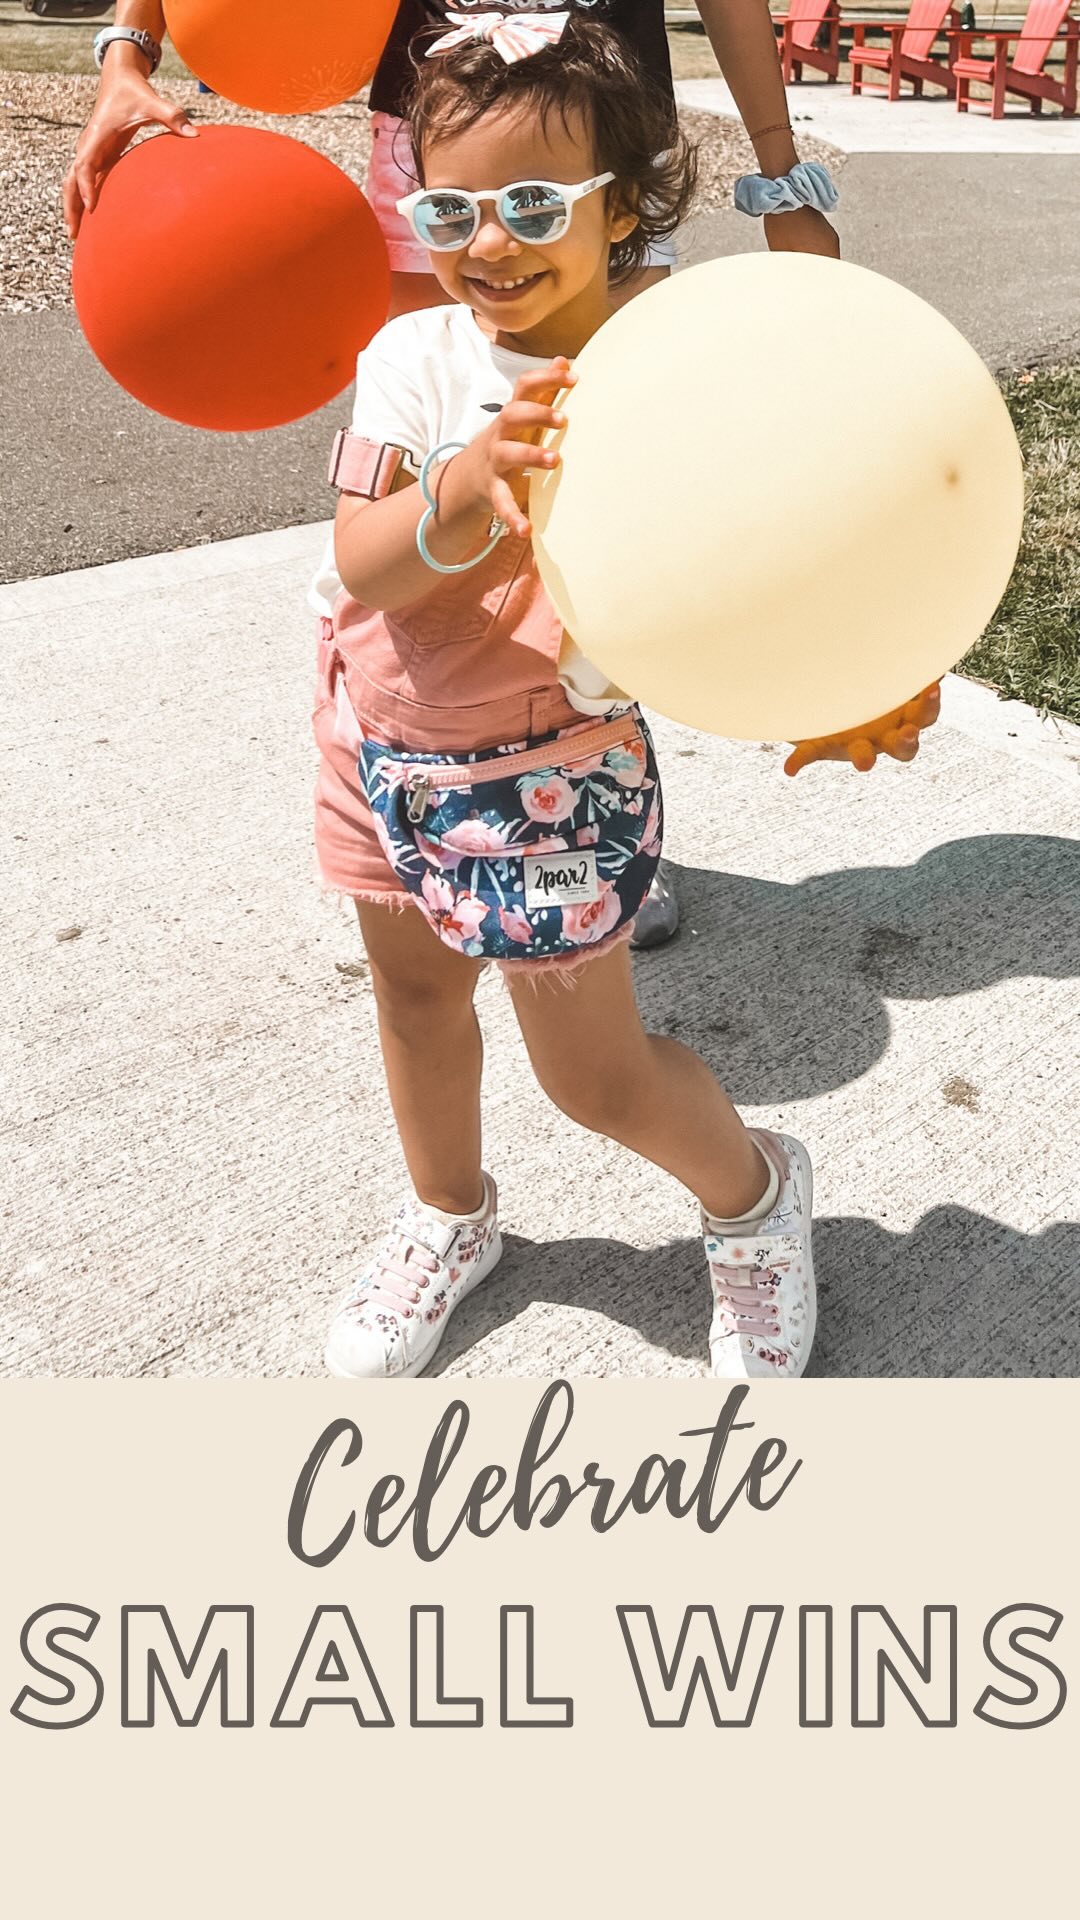 Celebrate every win, no matter how small! 🙂

#29monthsold 🖍

#canadianmom #canadianmoms #homeiscanada #canadianmama #canadianfamily #canadianlifestyle #canadianbaby #canadianlife #ottawabloggers #ottawamoms #ottawablogger #whiteliving #minimalisthome #motivationoftheday  #homeschool #homeschoolmom #homeschooling #homeschoolmama #homeschoolcanada . #whatsweet_joy #augustsummerpost #mixingthehomestyles #twosdayaug #hellolsaugust . #stillsummer_here #augustdaysquare #abirdseyedecorview #happyplacels #specialdaysrhere